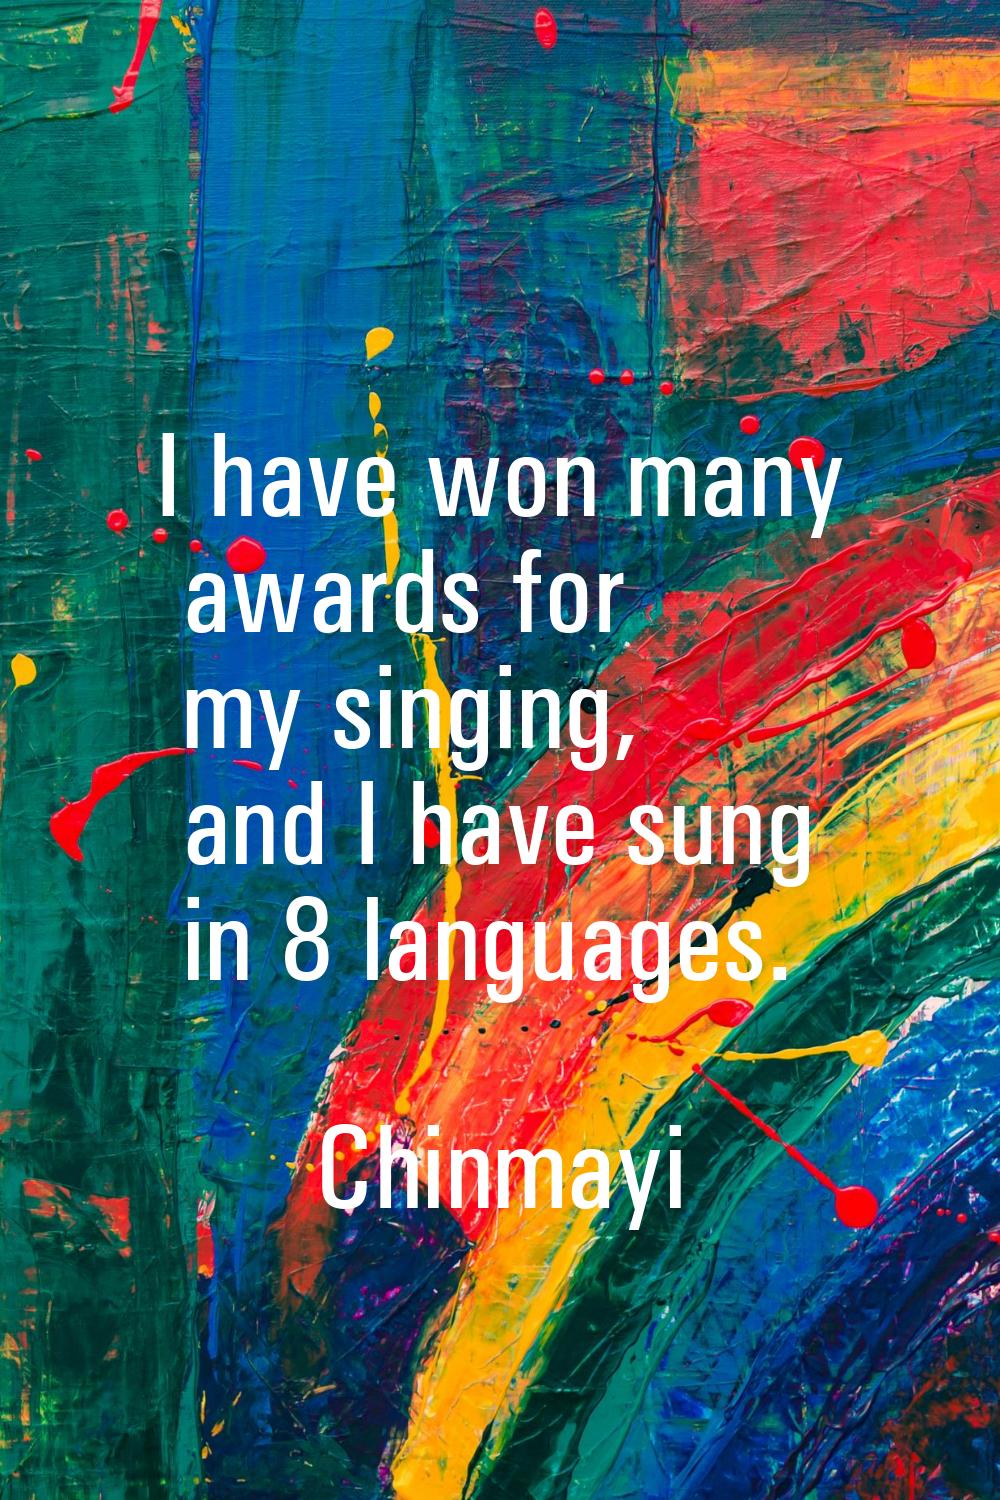 I have won many awards for my singing, and I have sung in 8 languages.